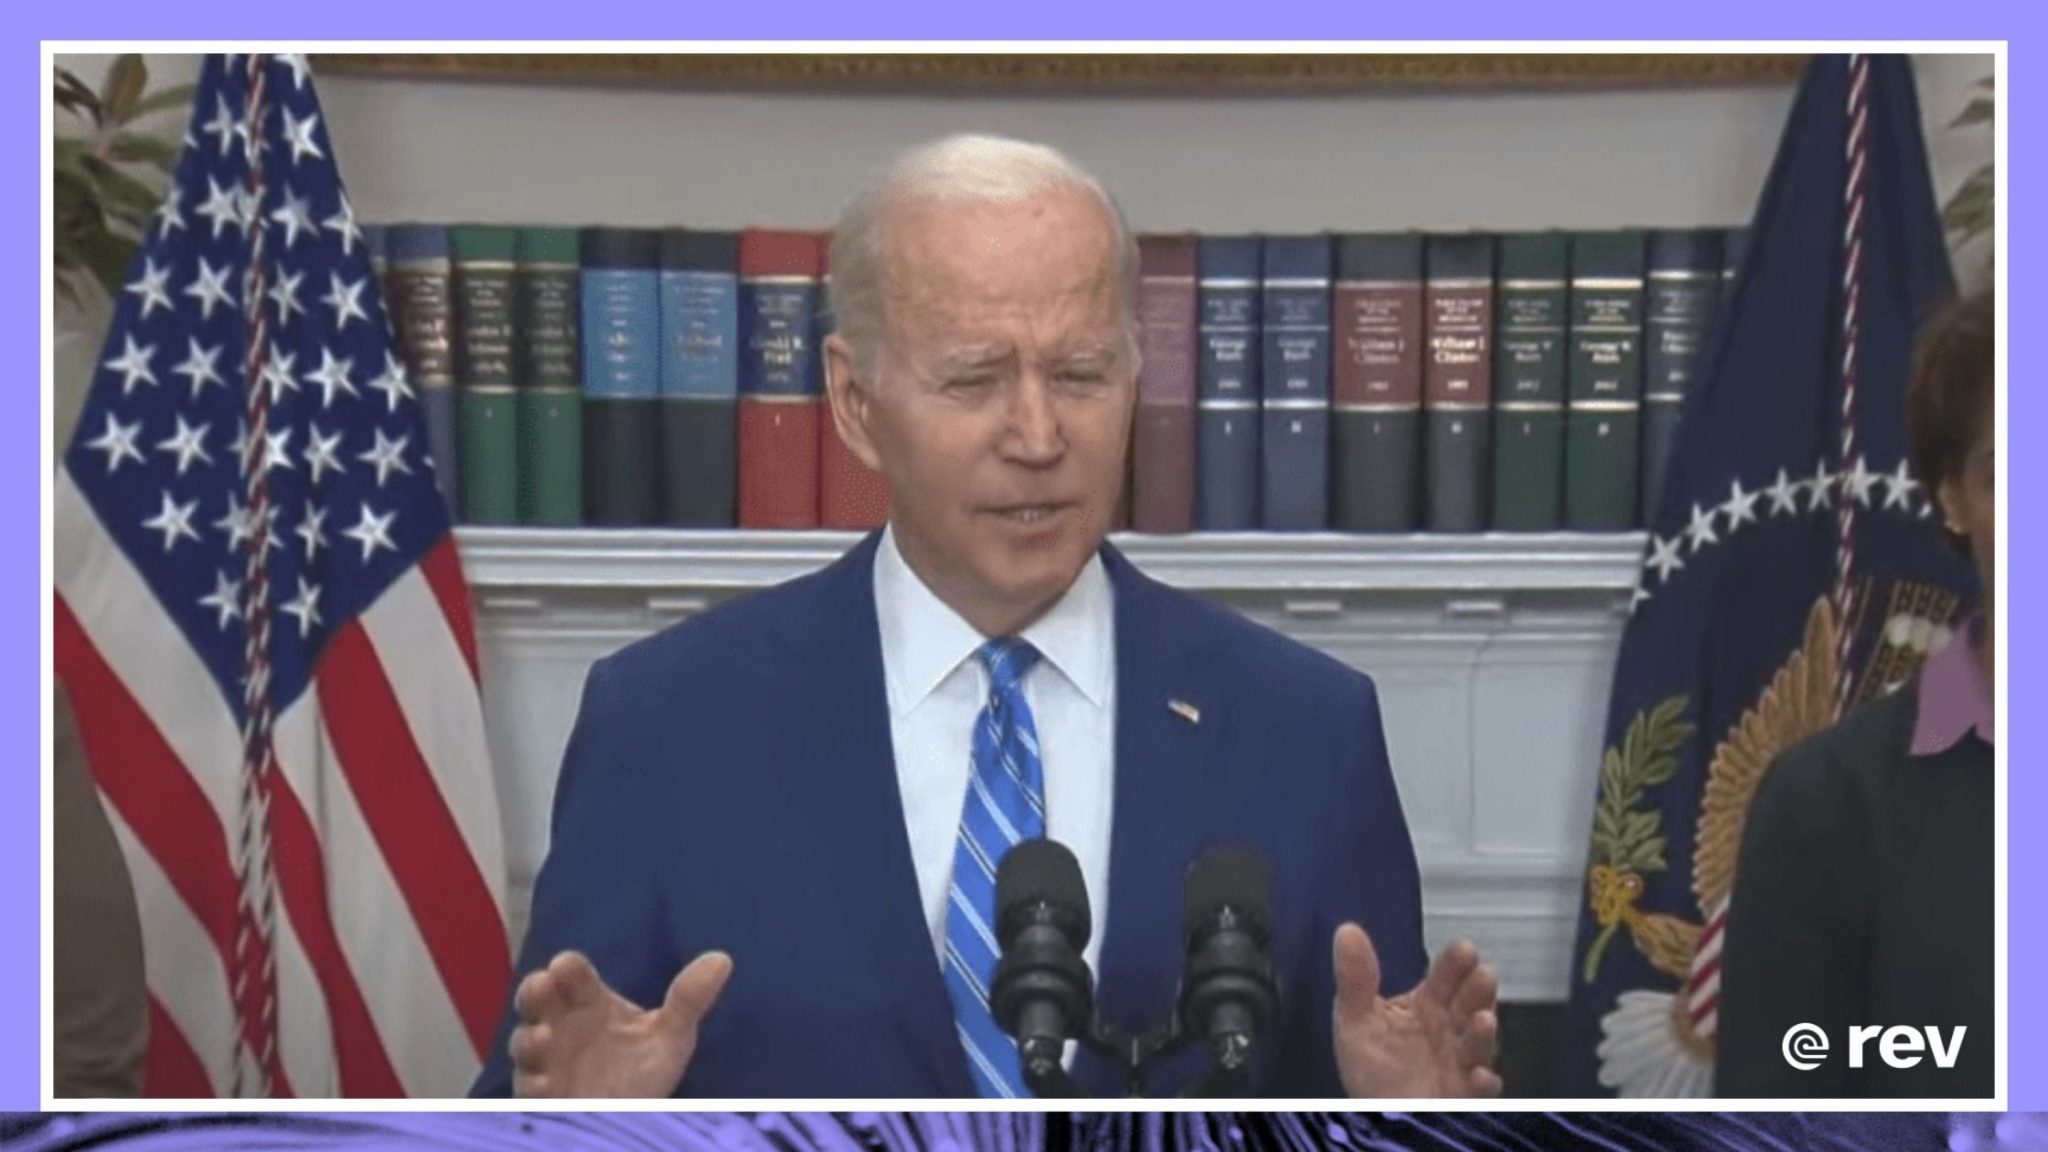 President Biden delivers remarks on economic growth, jobs and deficit 5/4/2022 Transcript